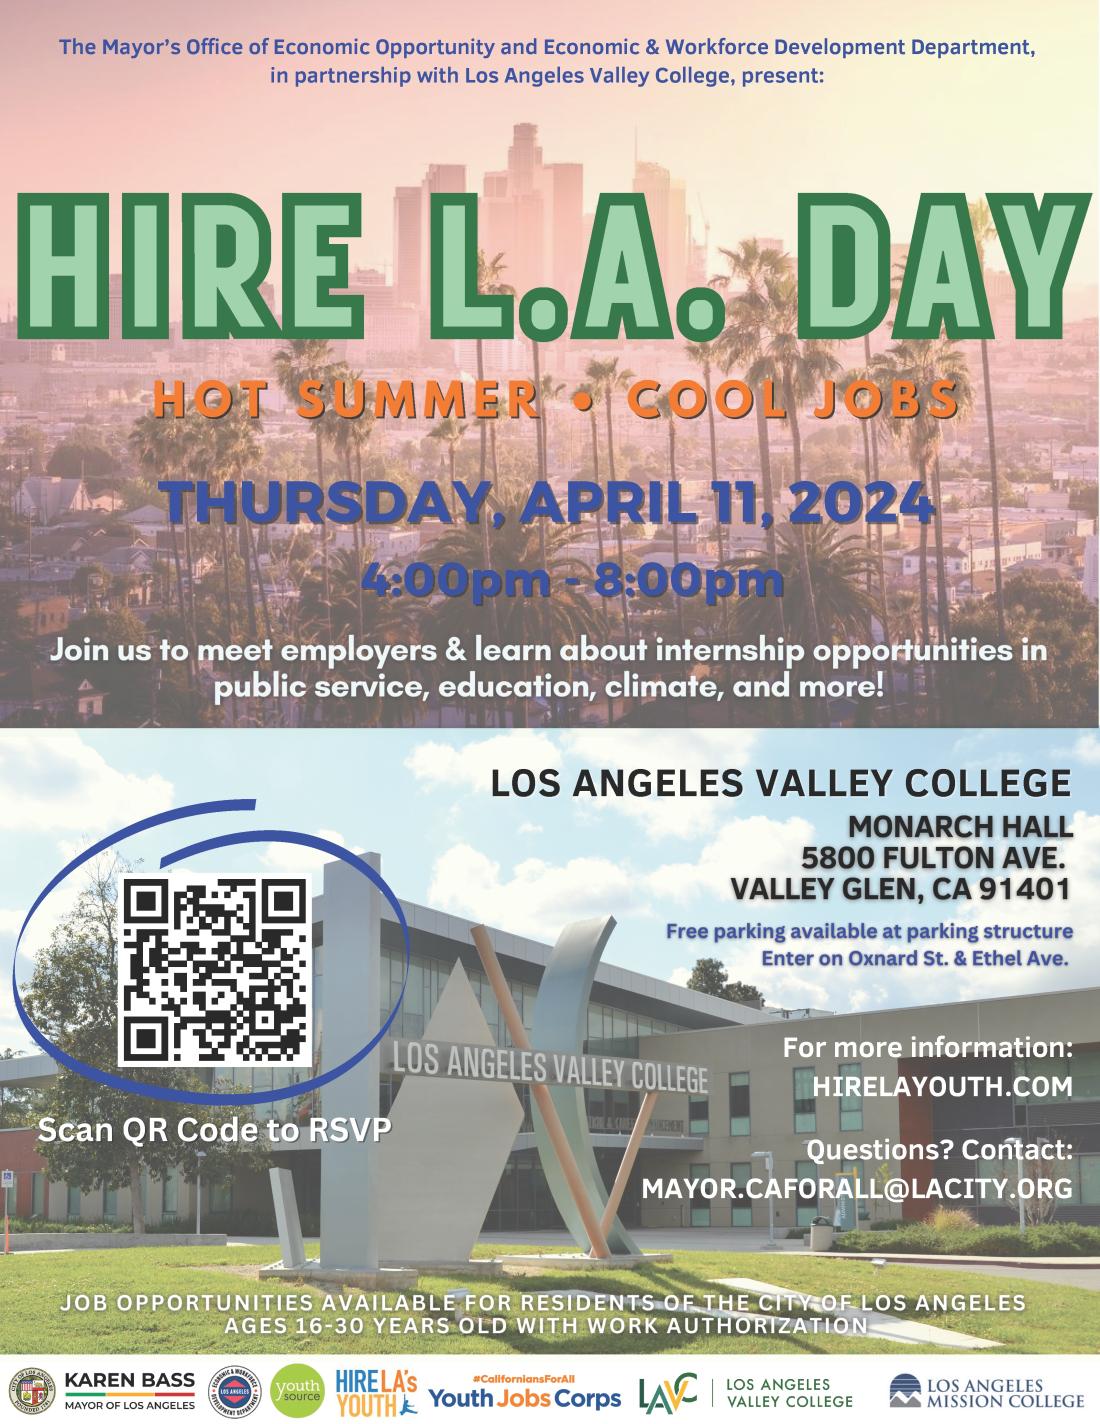 The Mayor’s Office of Economic Opportunity and Economic & Workforce Development Department is hosting a Hire L.A. Day at LA Valley College on Thursday, April 11 from 4-8 p.m.